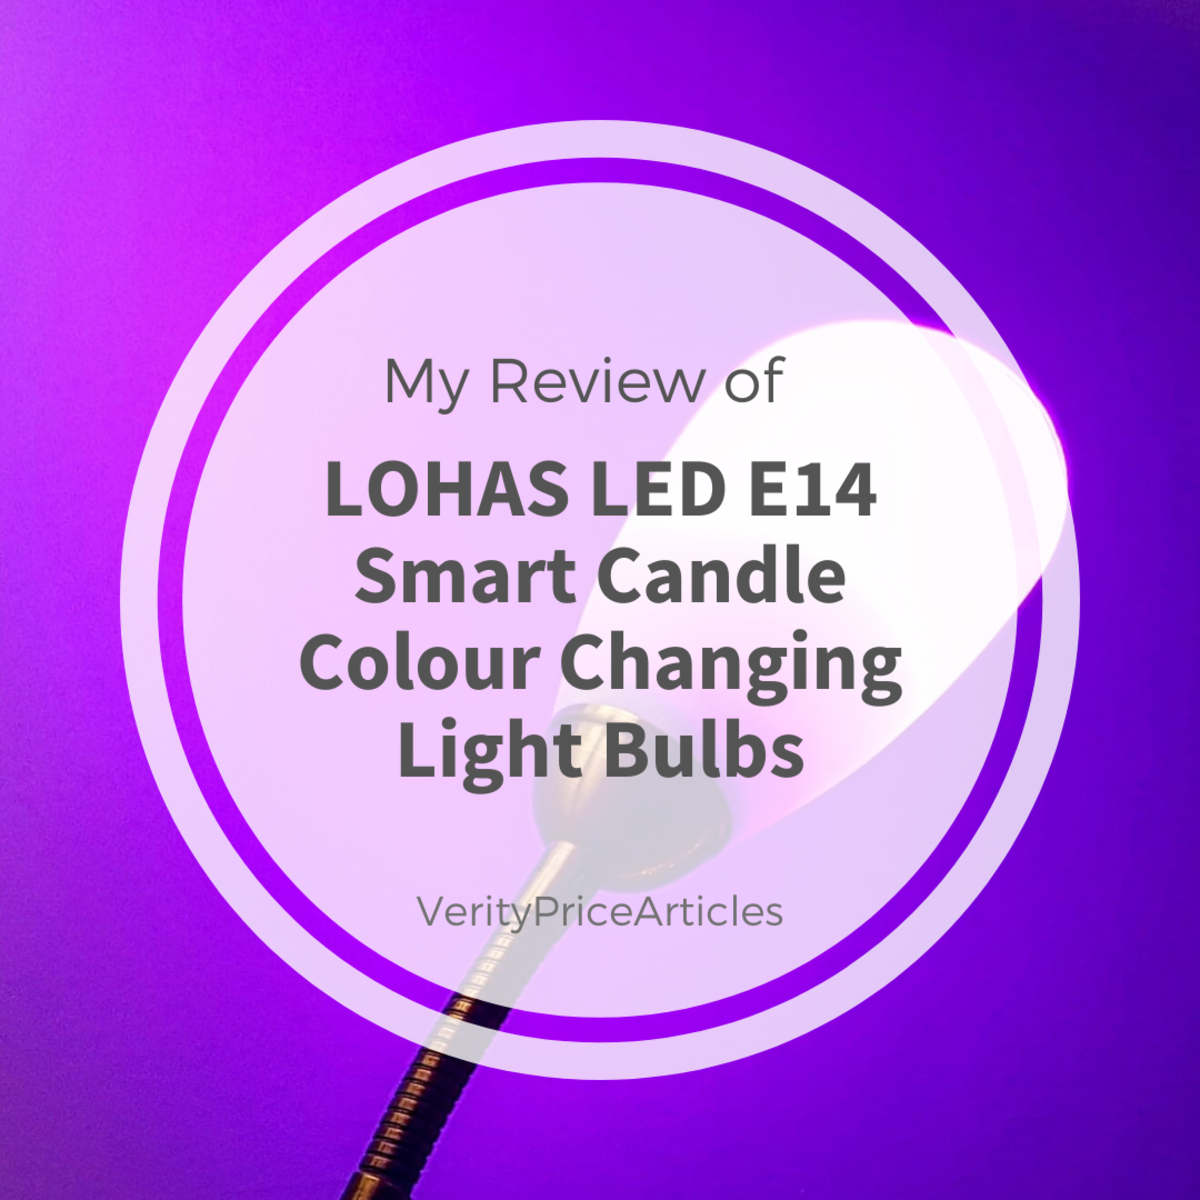 My Review of Lohas LED E14 Candle Colour Changing Smart Light Bulbs